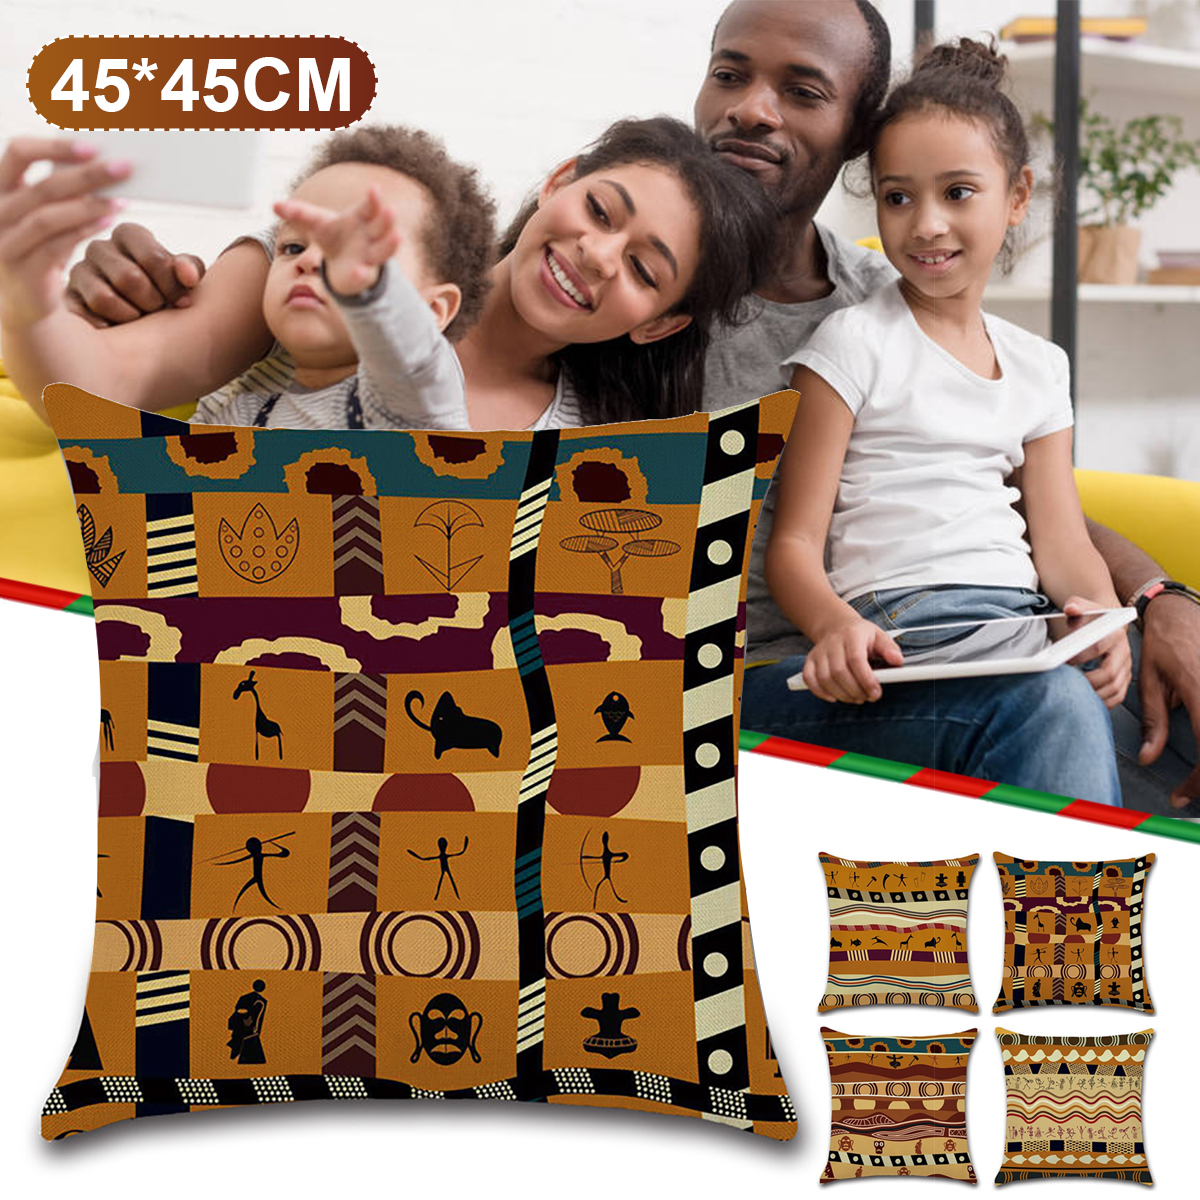 45x45CM-African-National-Style-Geometric-Printing-Cushion-Cover-Linen-Pillow-Case-Home-Decor-Pillow--1915524-1